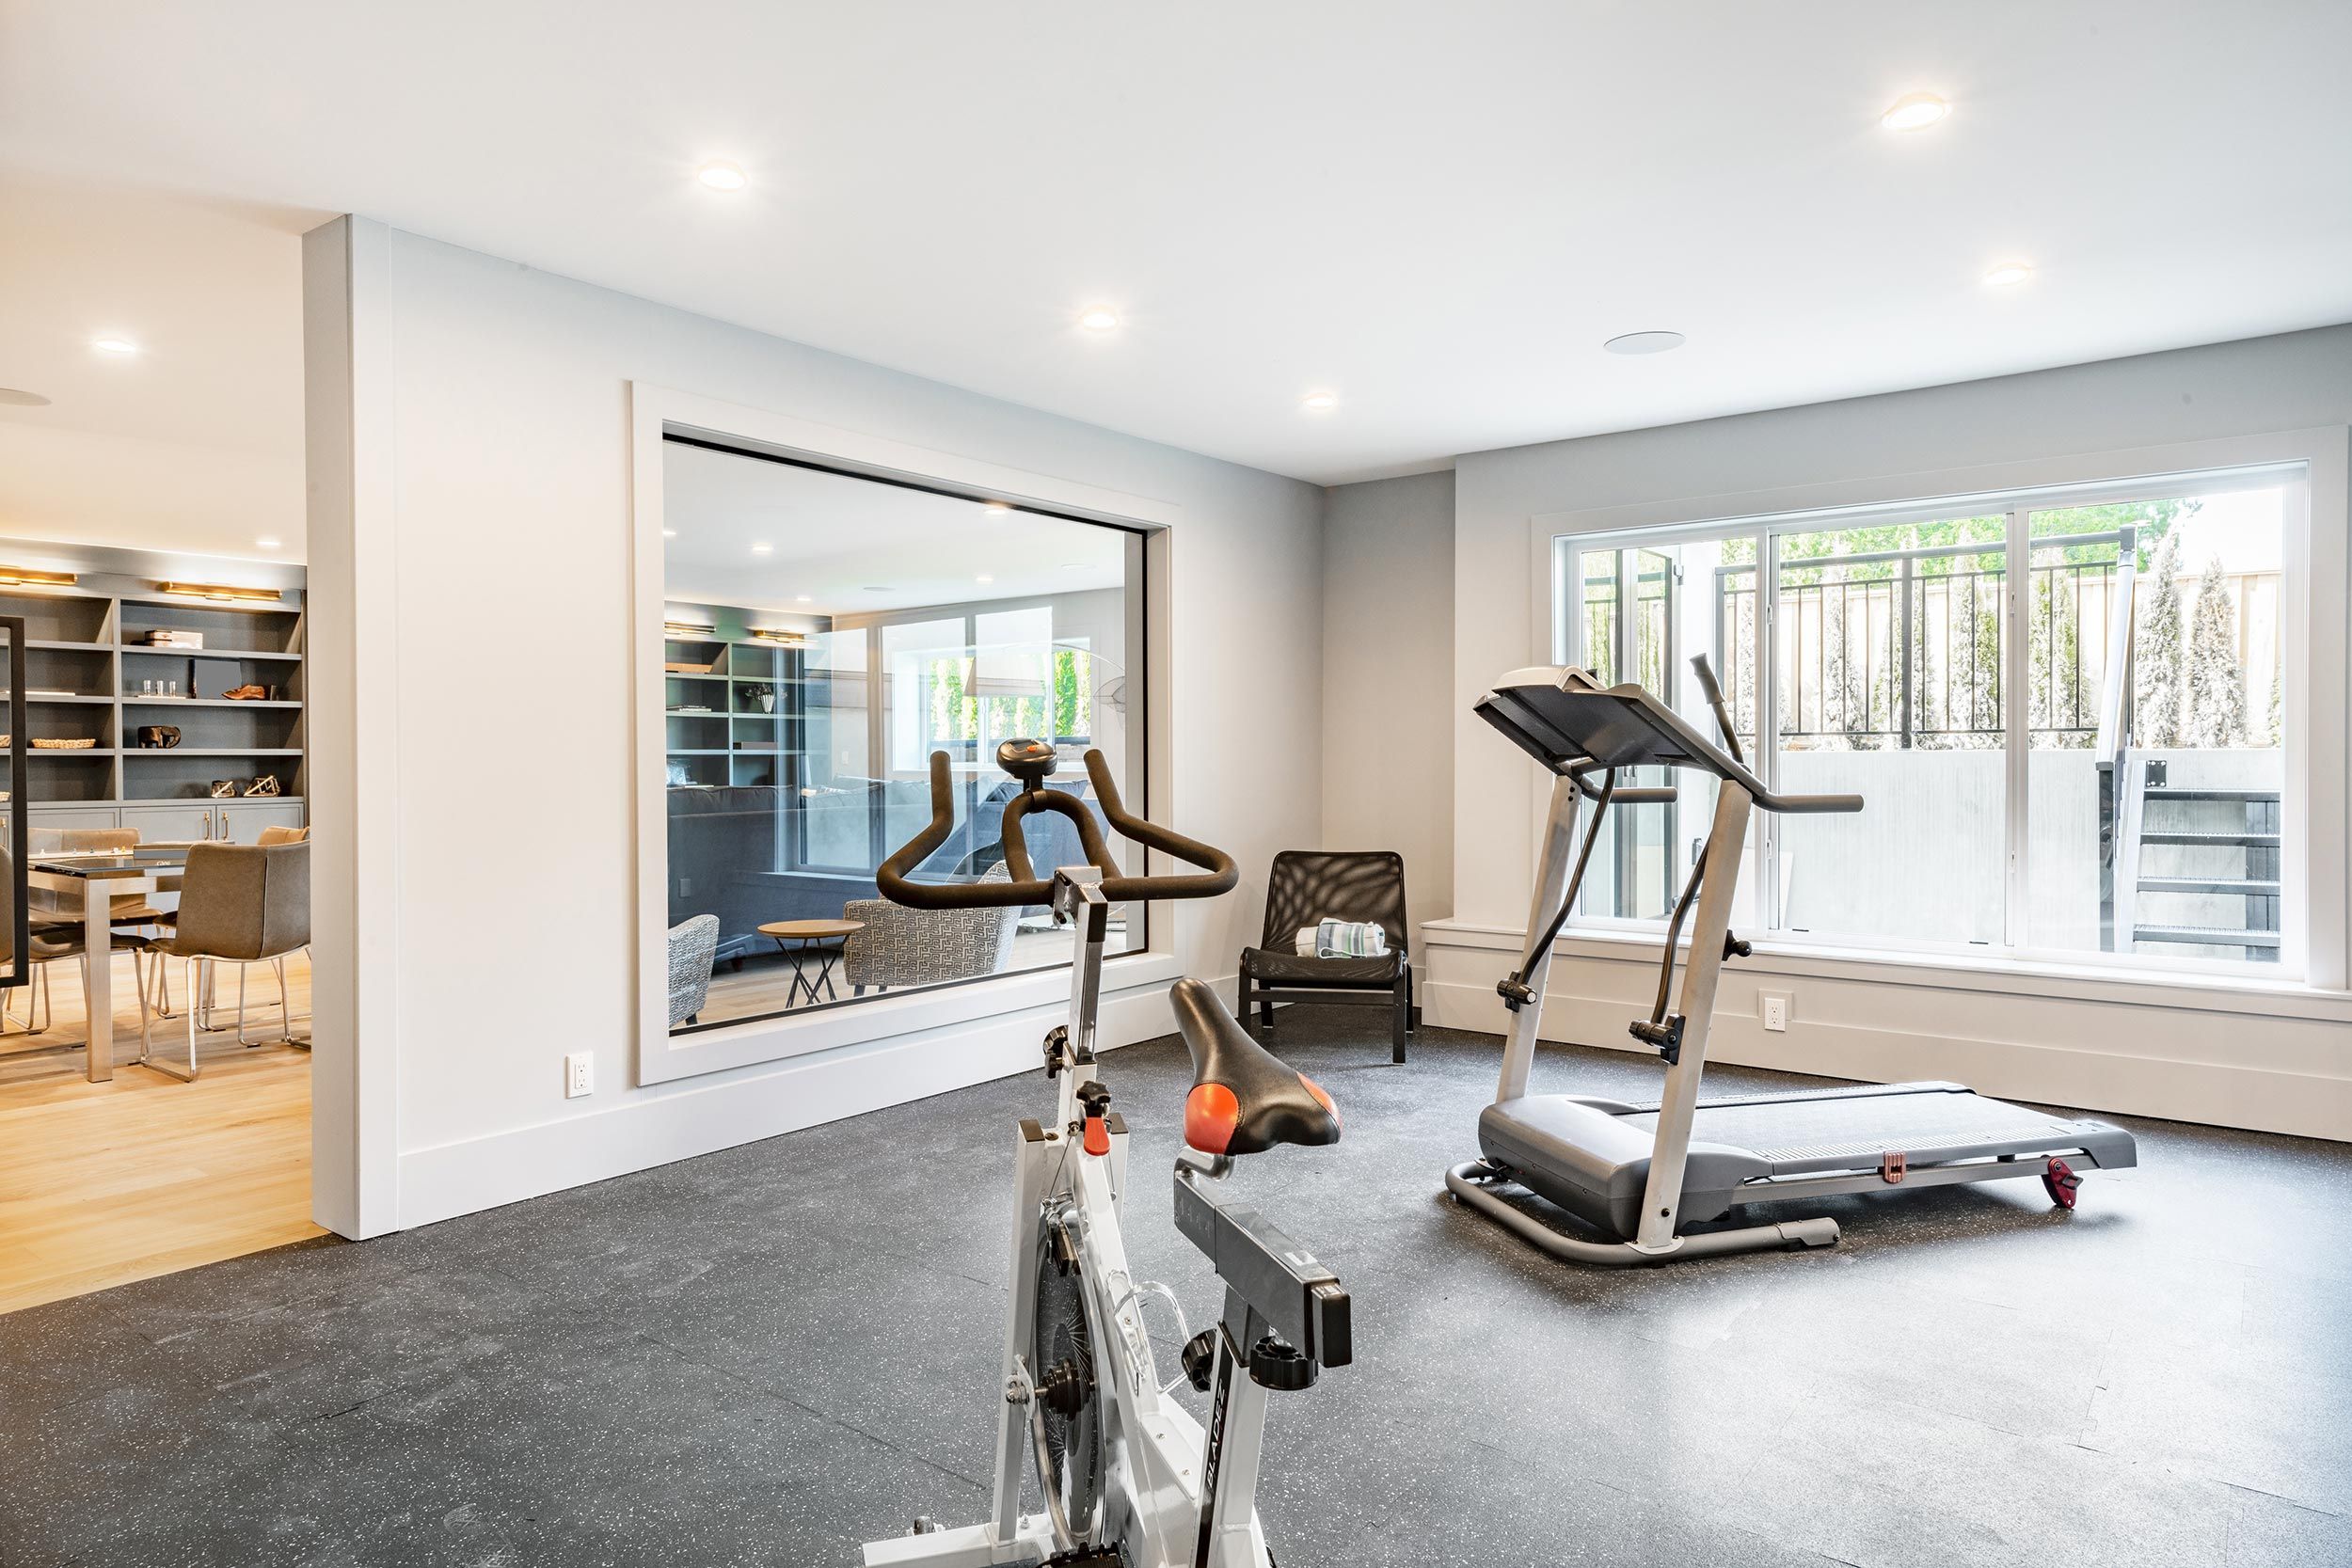 Home gym with lighting and climate control and Wi-Fi